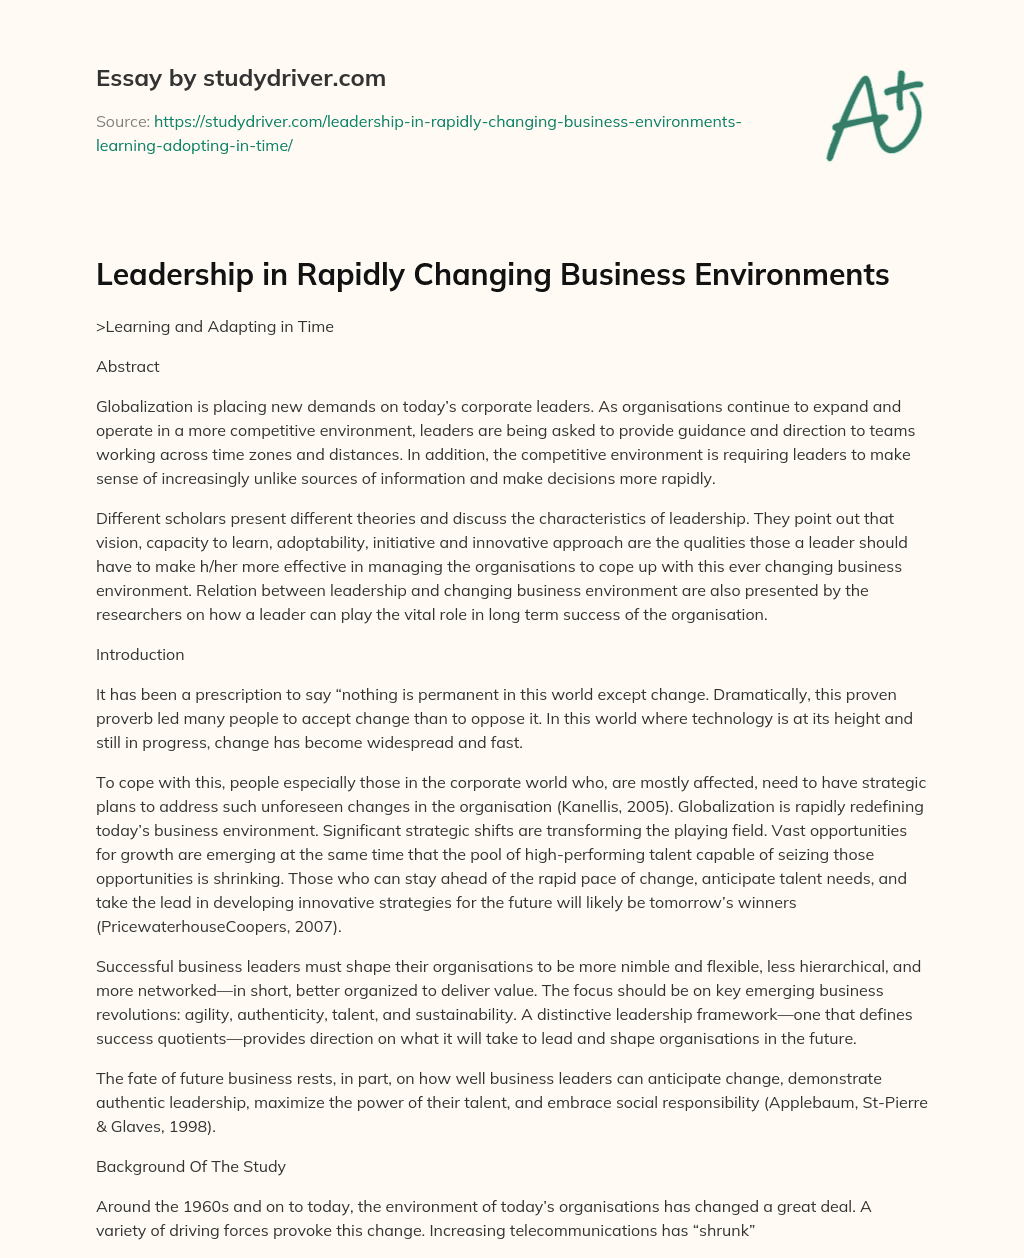 Leadership in Rapidly Changing Business Environments essay